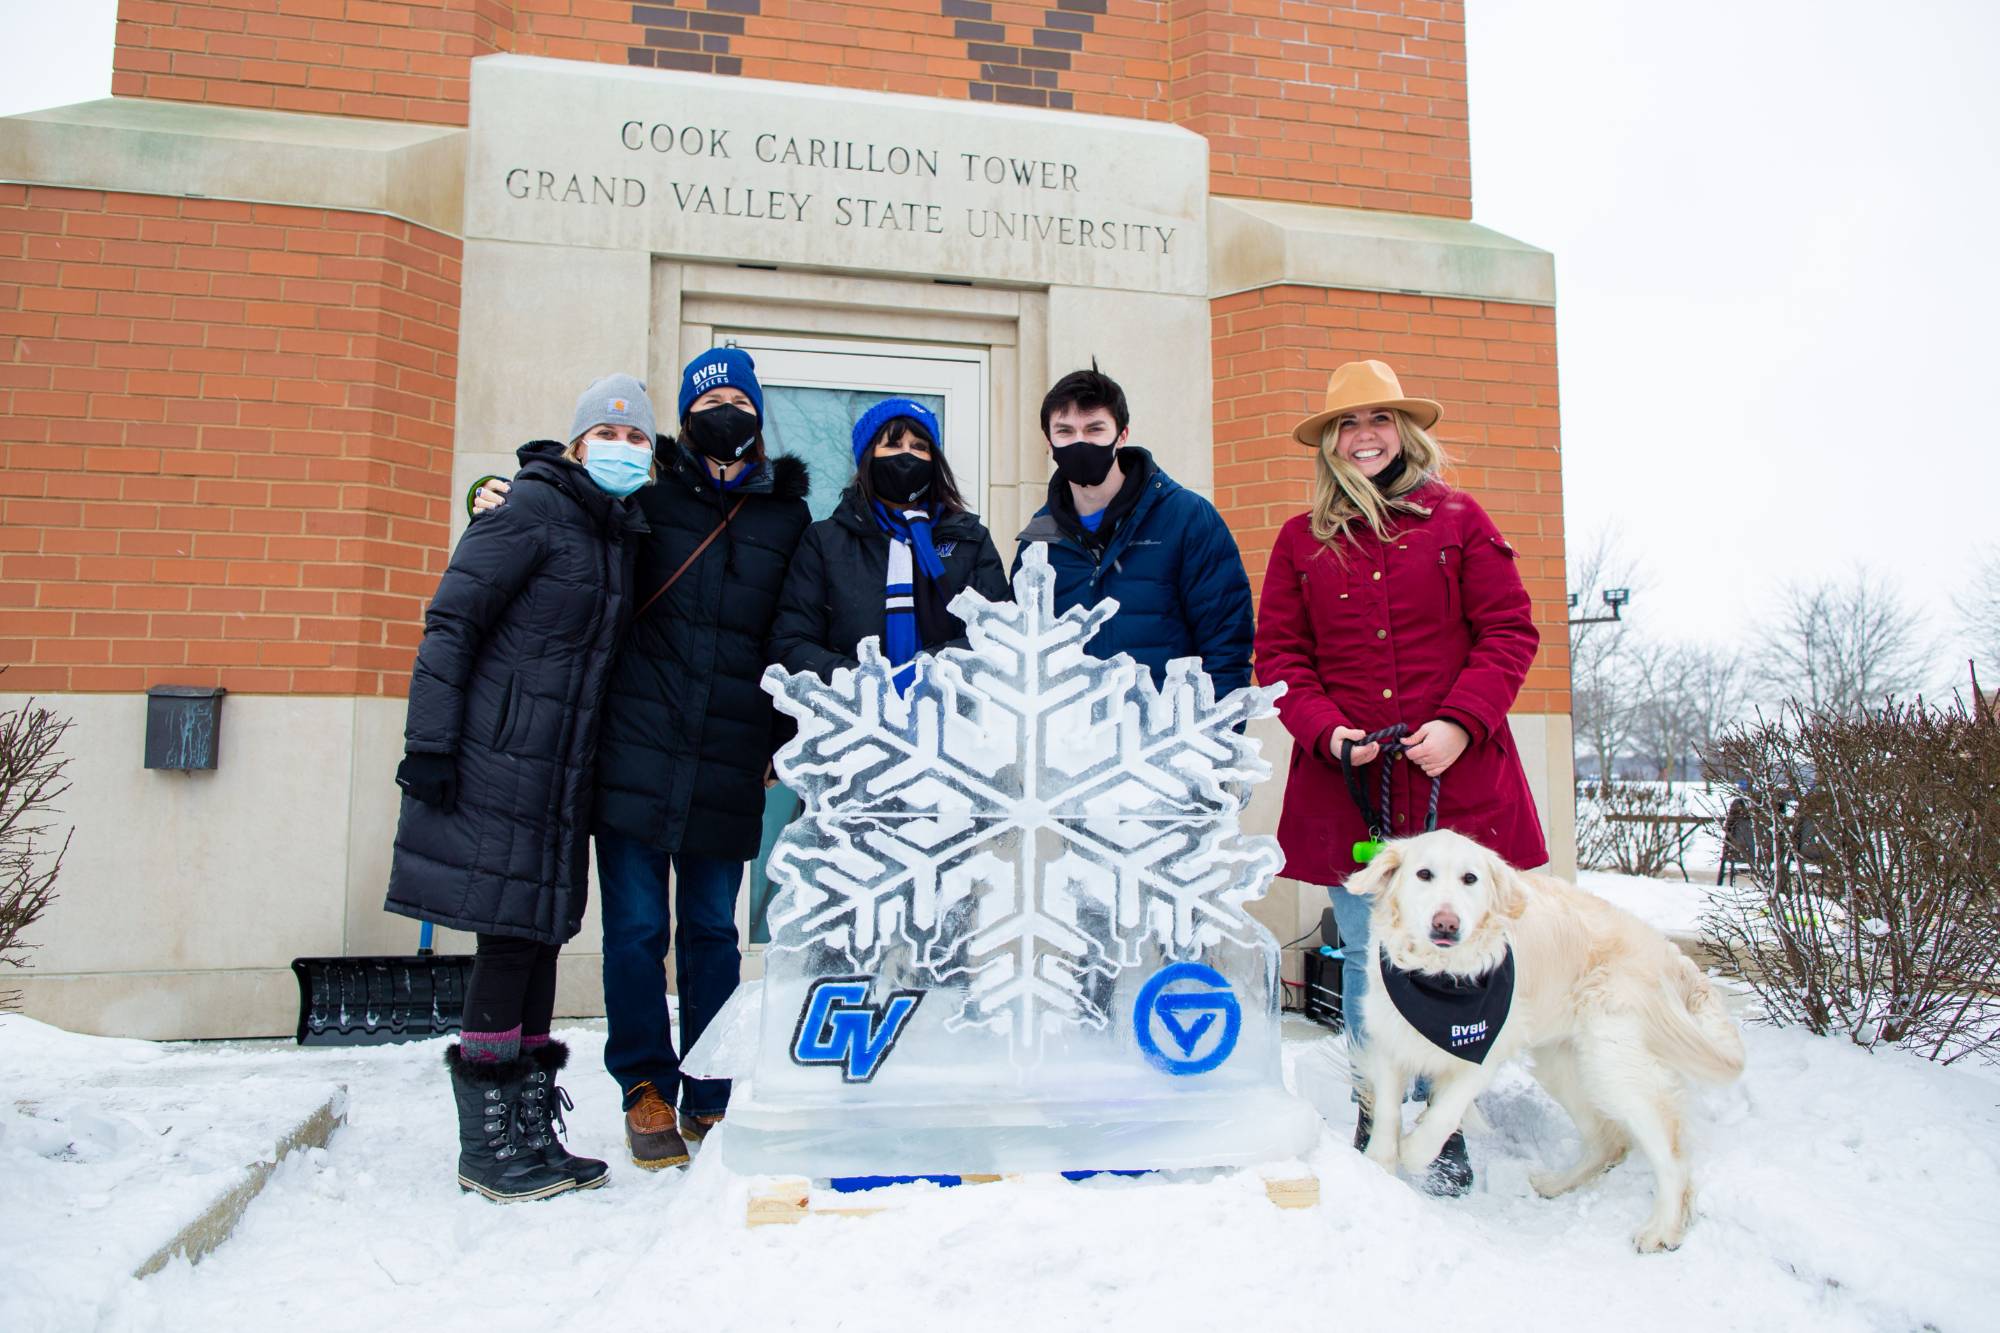 Group of 5 people standing around a snowflake ice sculpture